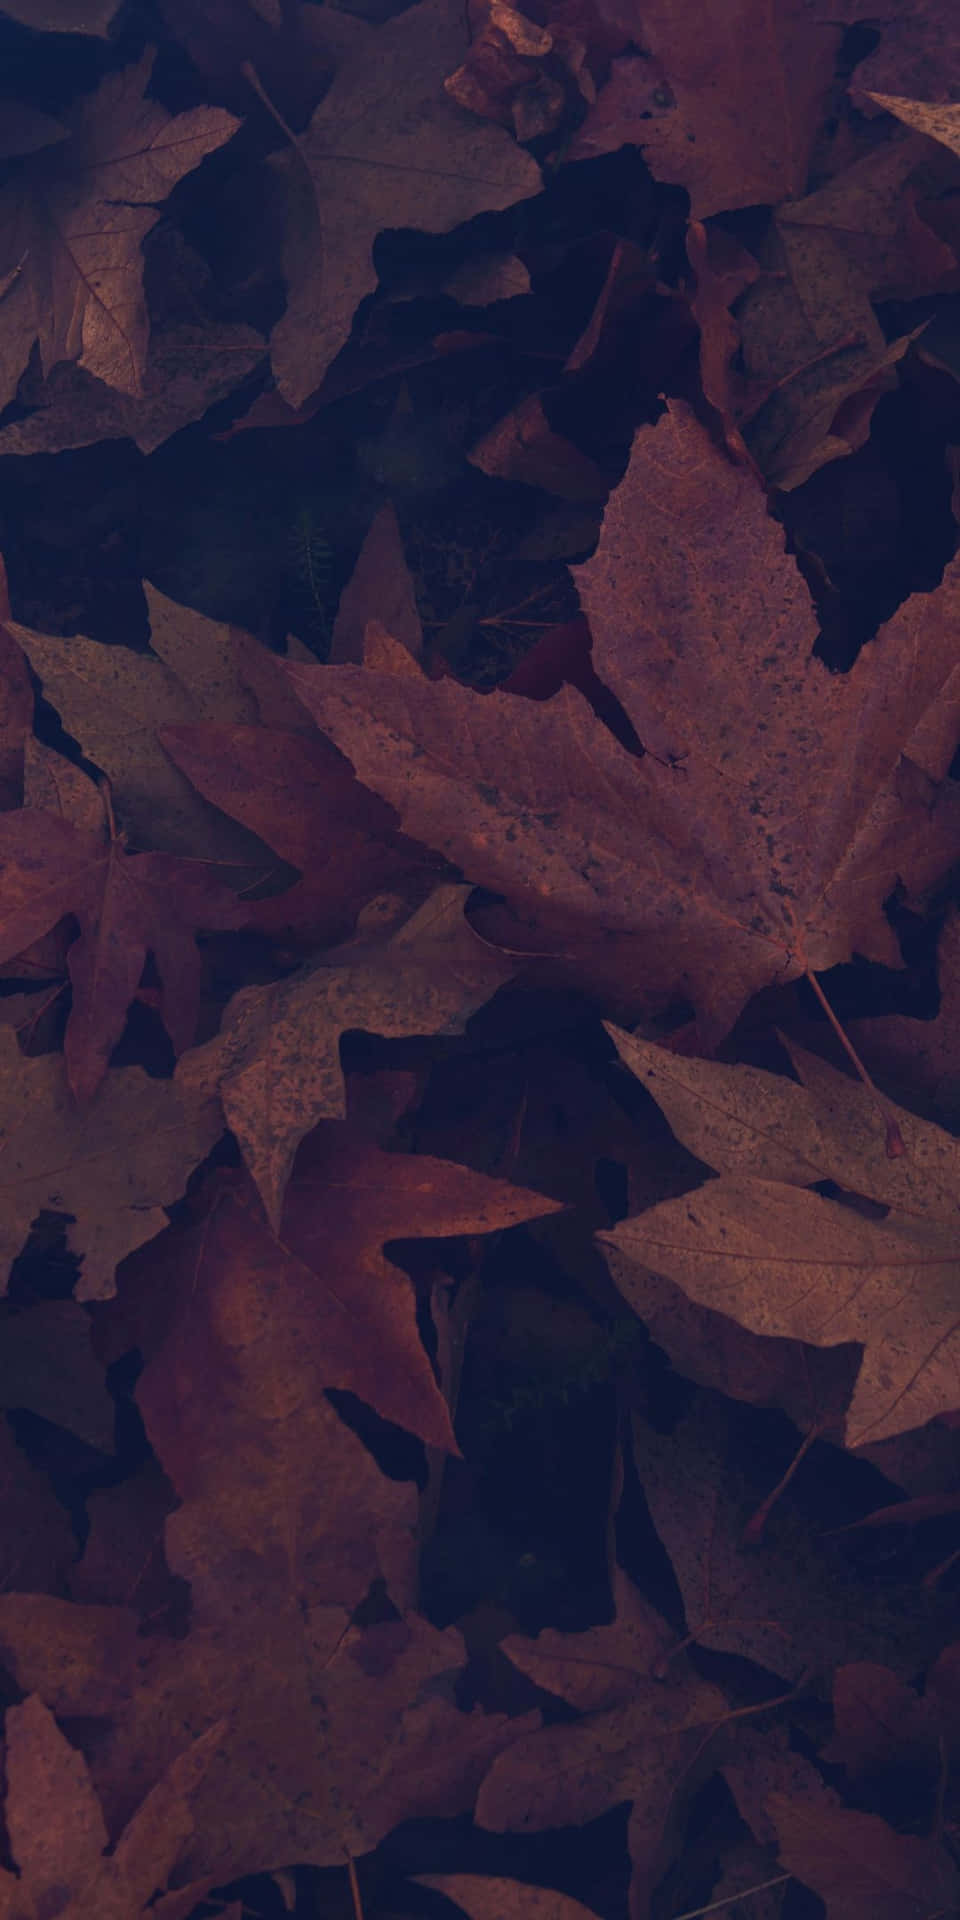 Maple Leaves With Maroon Overlay For Dark Autumn Wallpaper